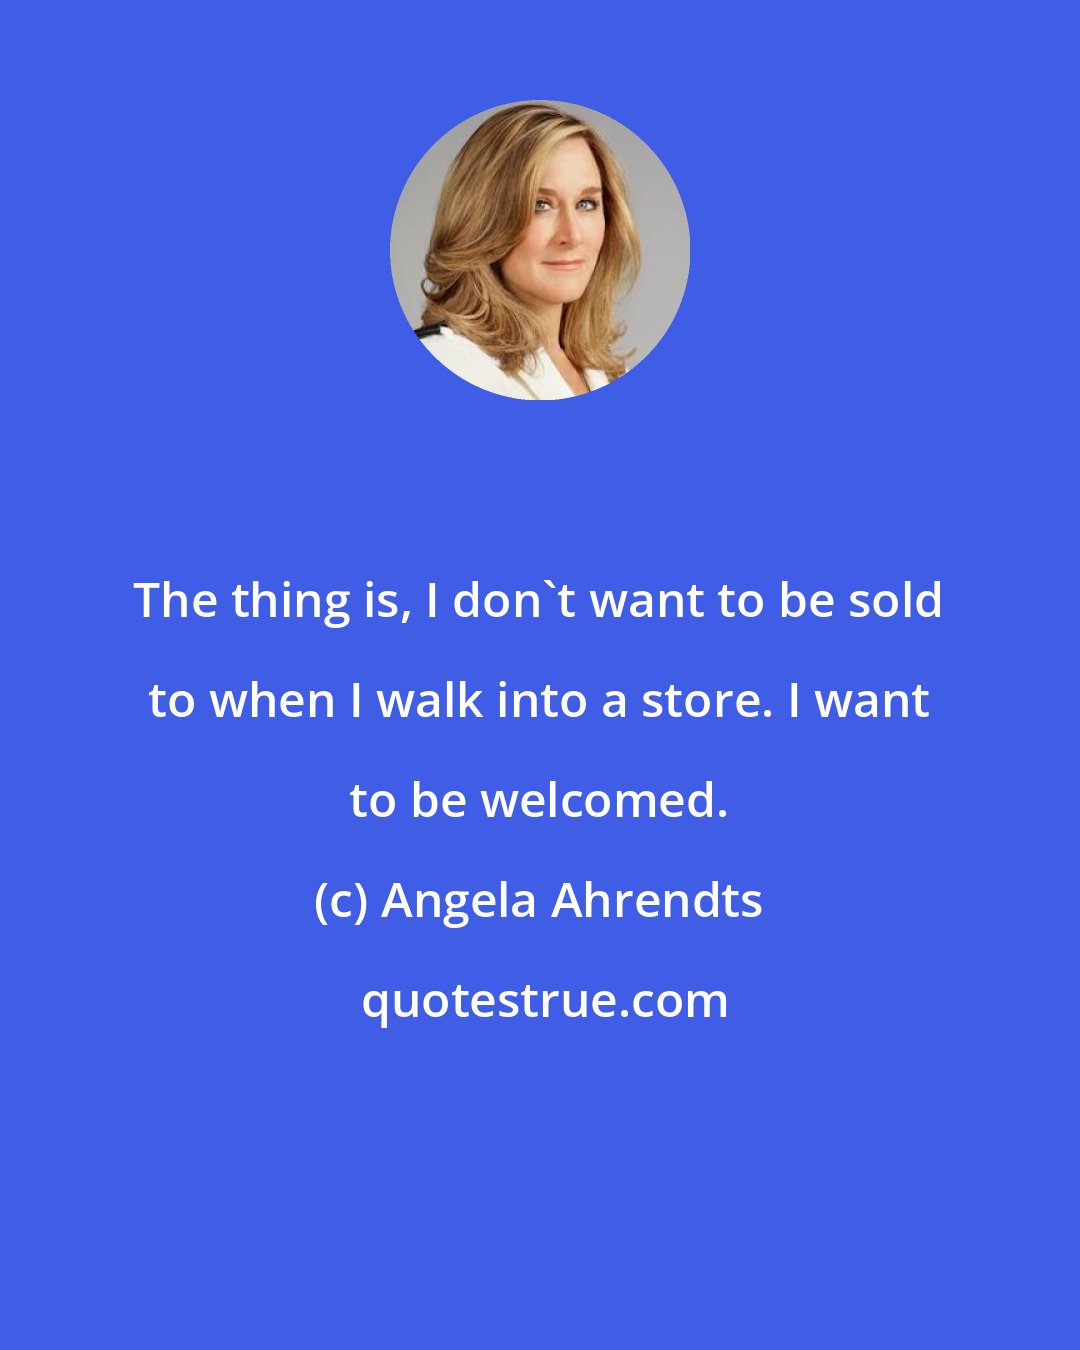 Angela Ahrendts: The thing is, I don't want to be sold to when I walk into a store. I want to be welcomed.